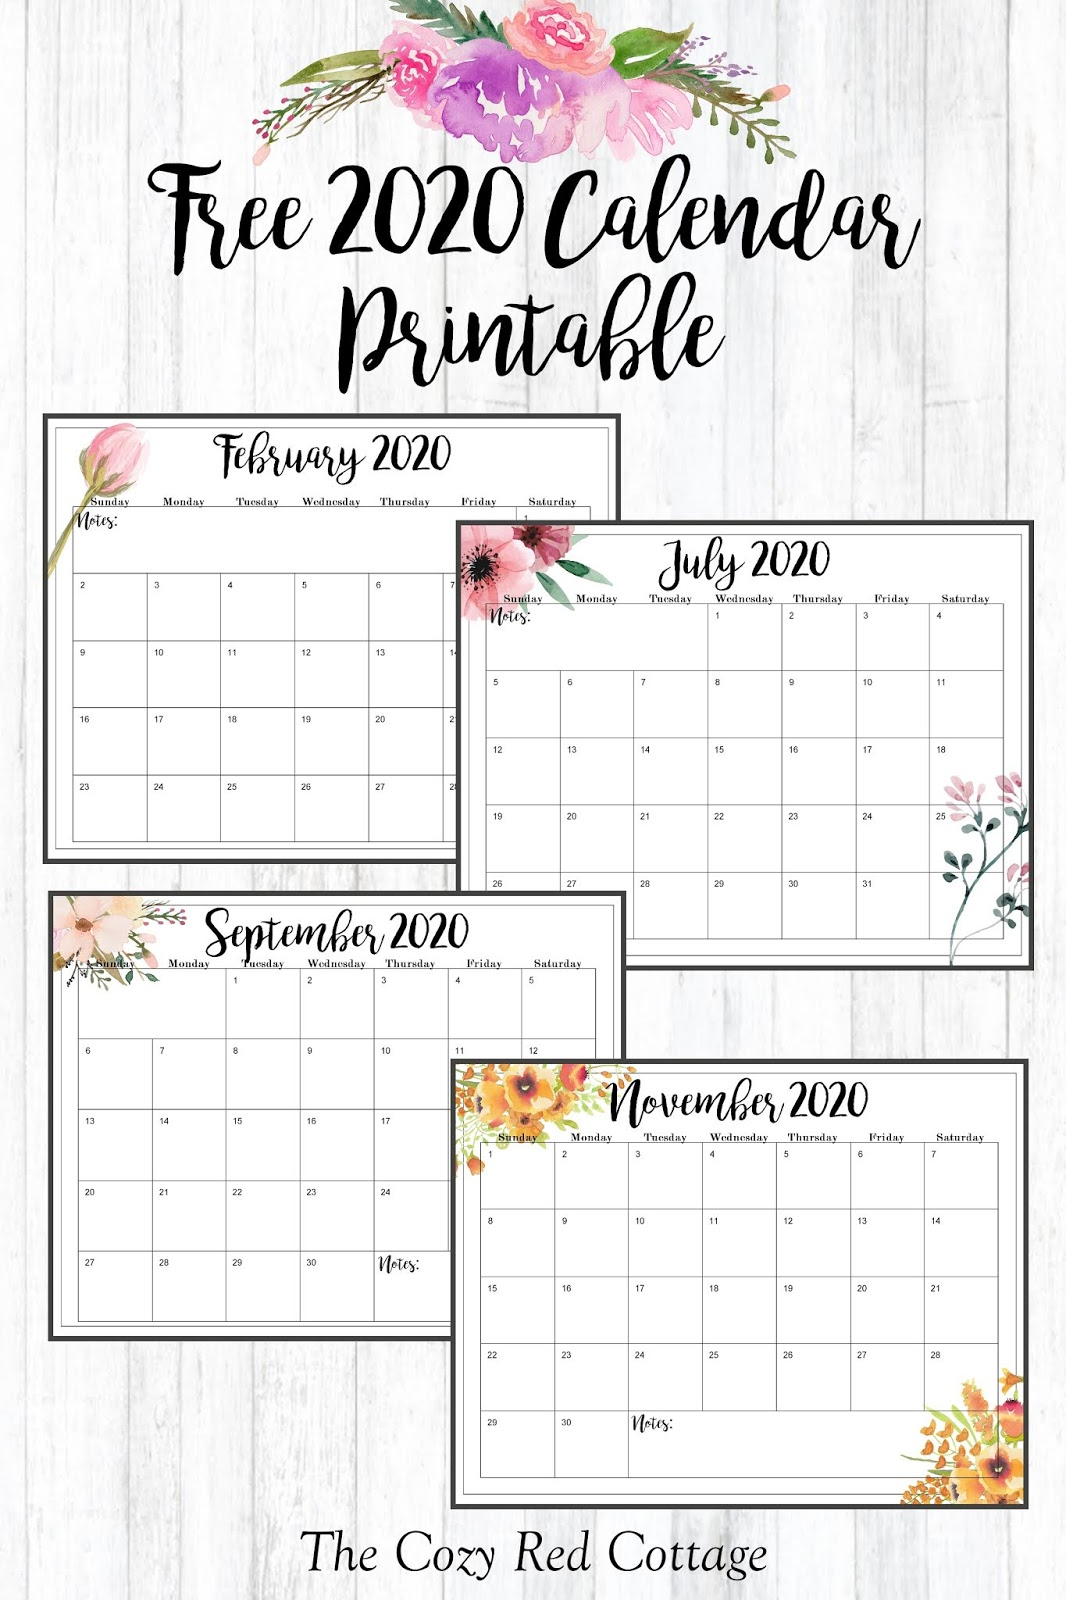 The Cozy Red Cottage: 2020 Calendar (Free Printables)